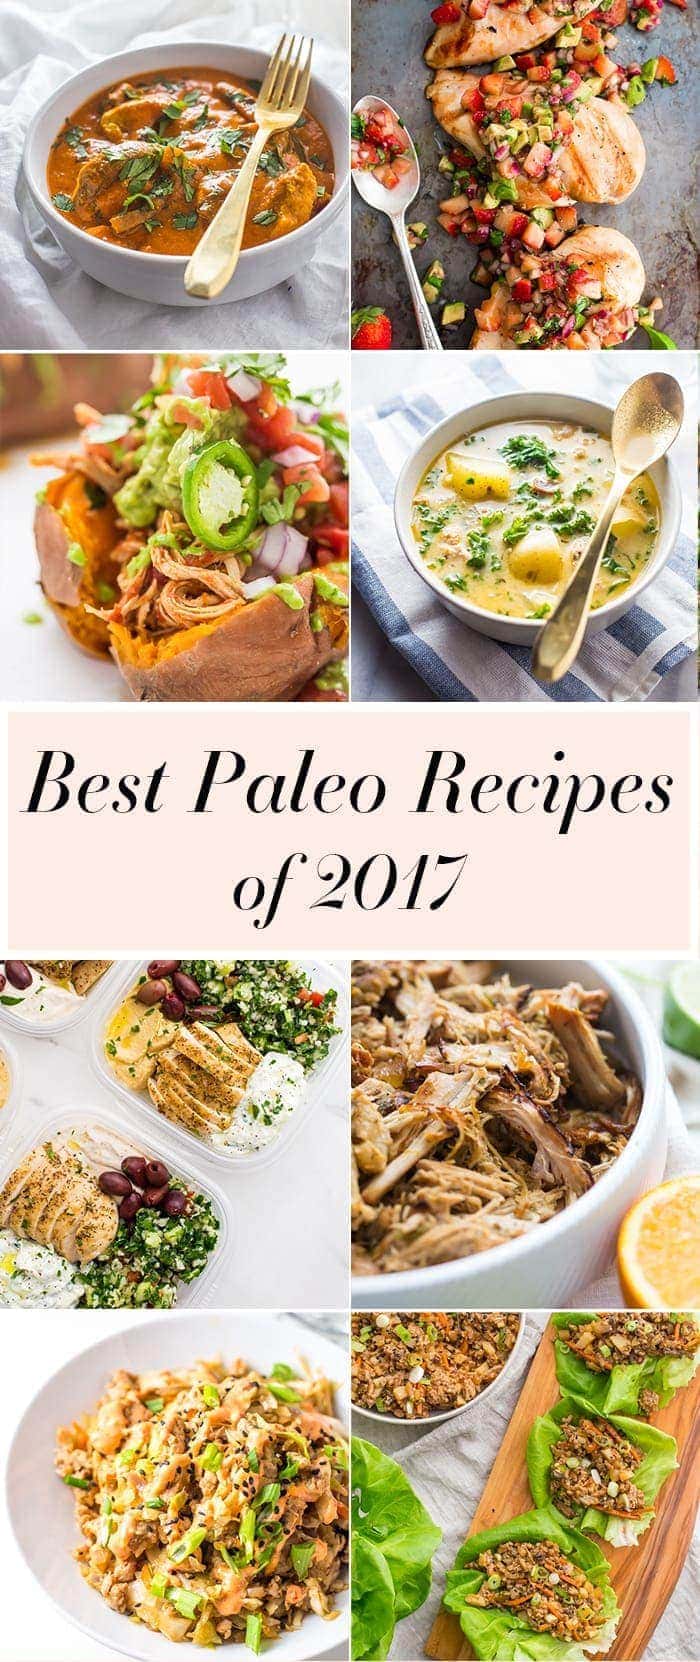 Our Best Paleo Recipes of 2017 - 40 Aprons